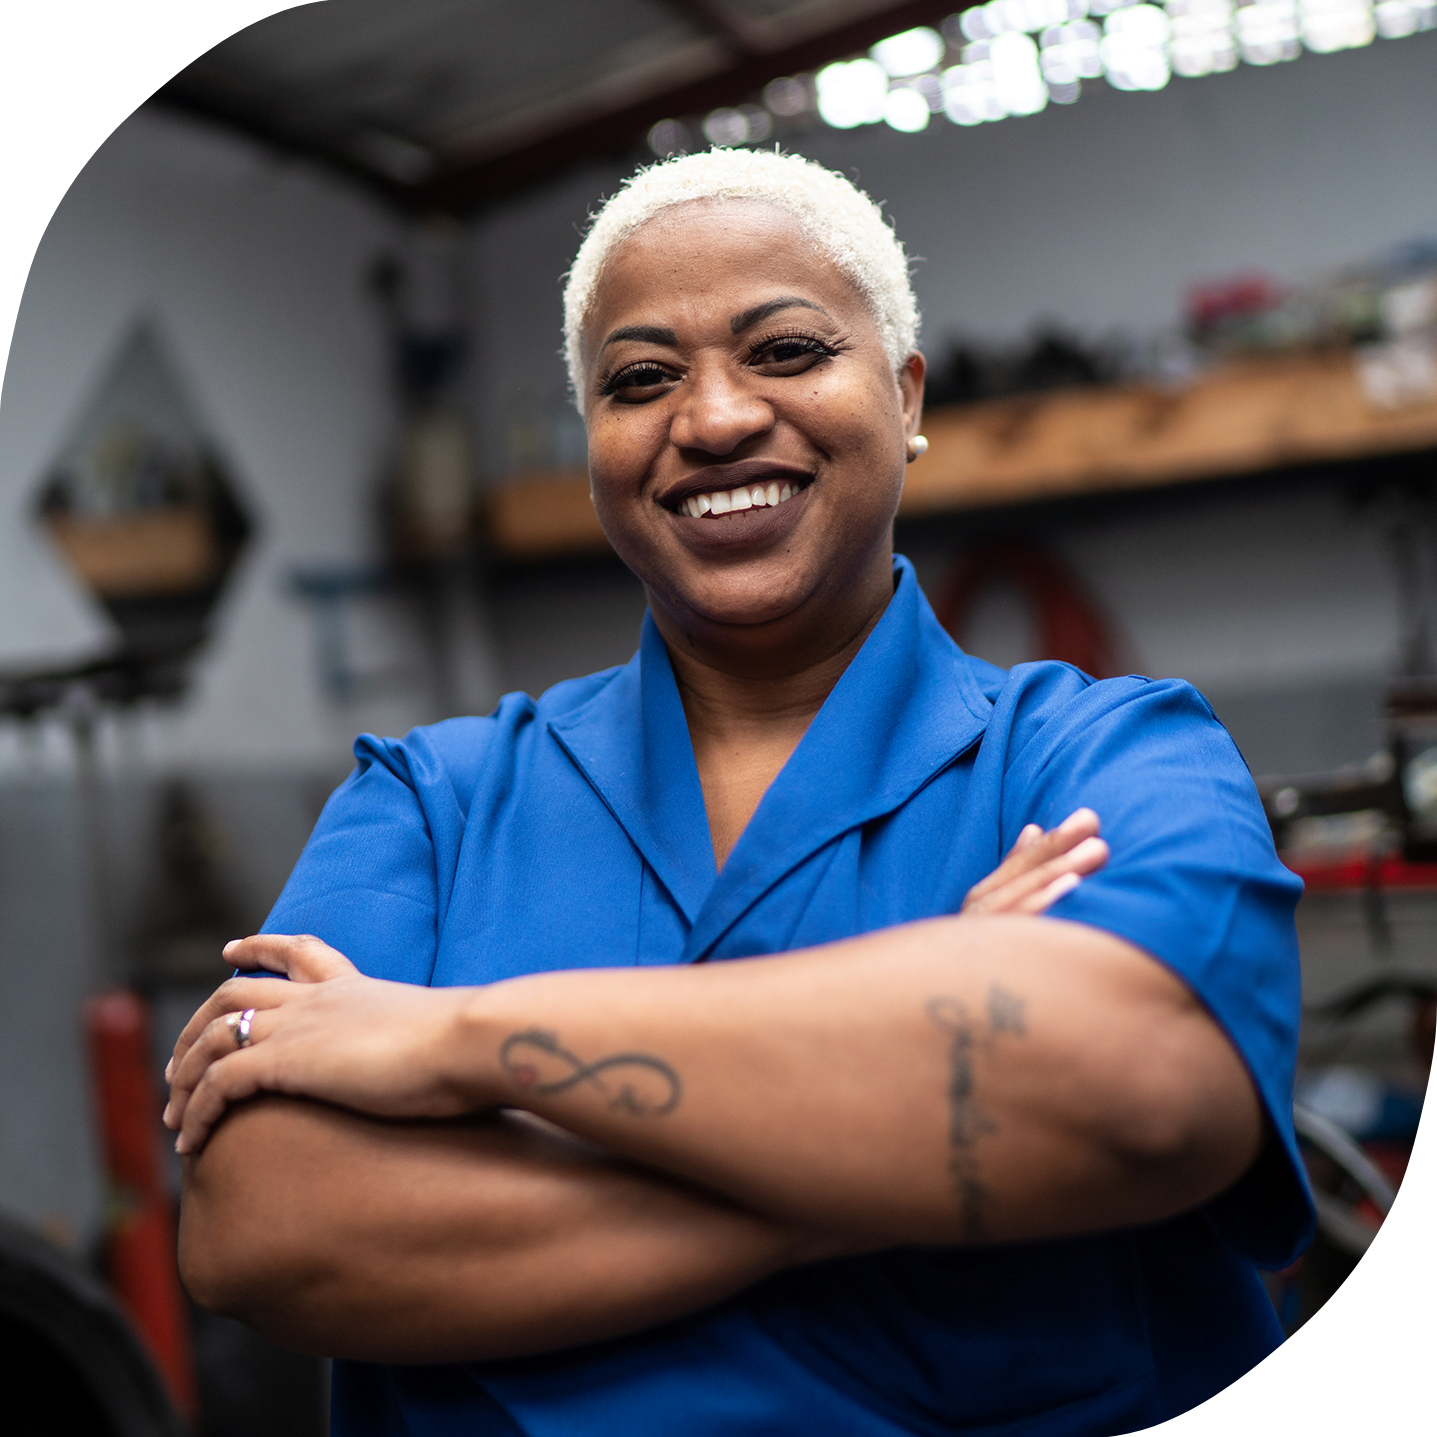 A Black woman with short blonde hair in a blue uniform has her arms crossed and is smiling. She is working at a auto car repair service center.